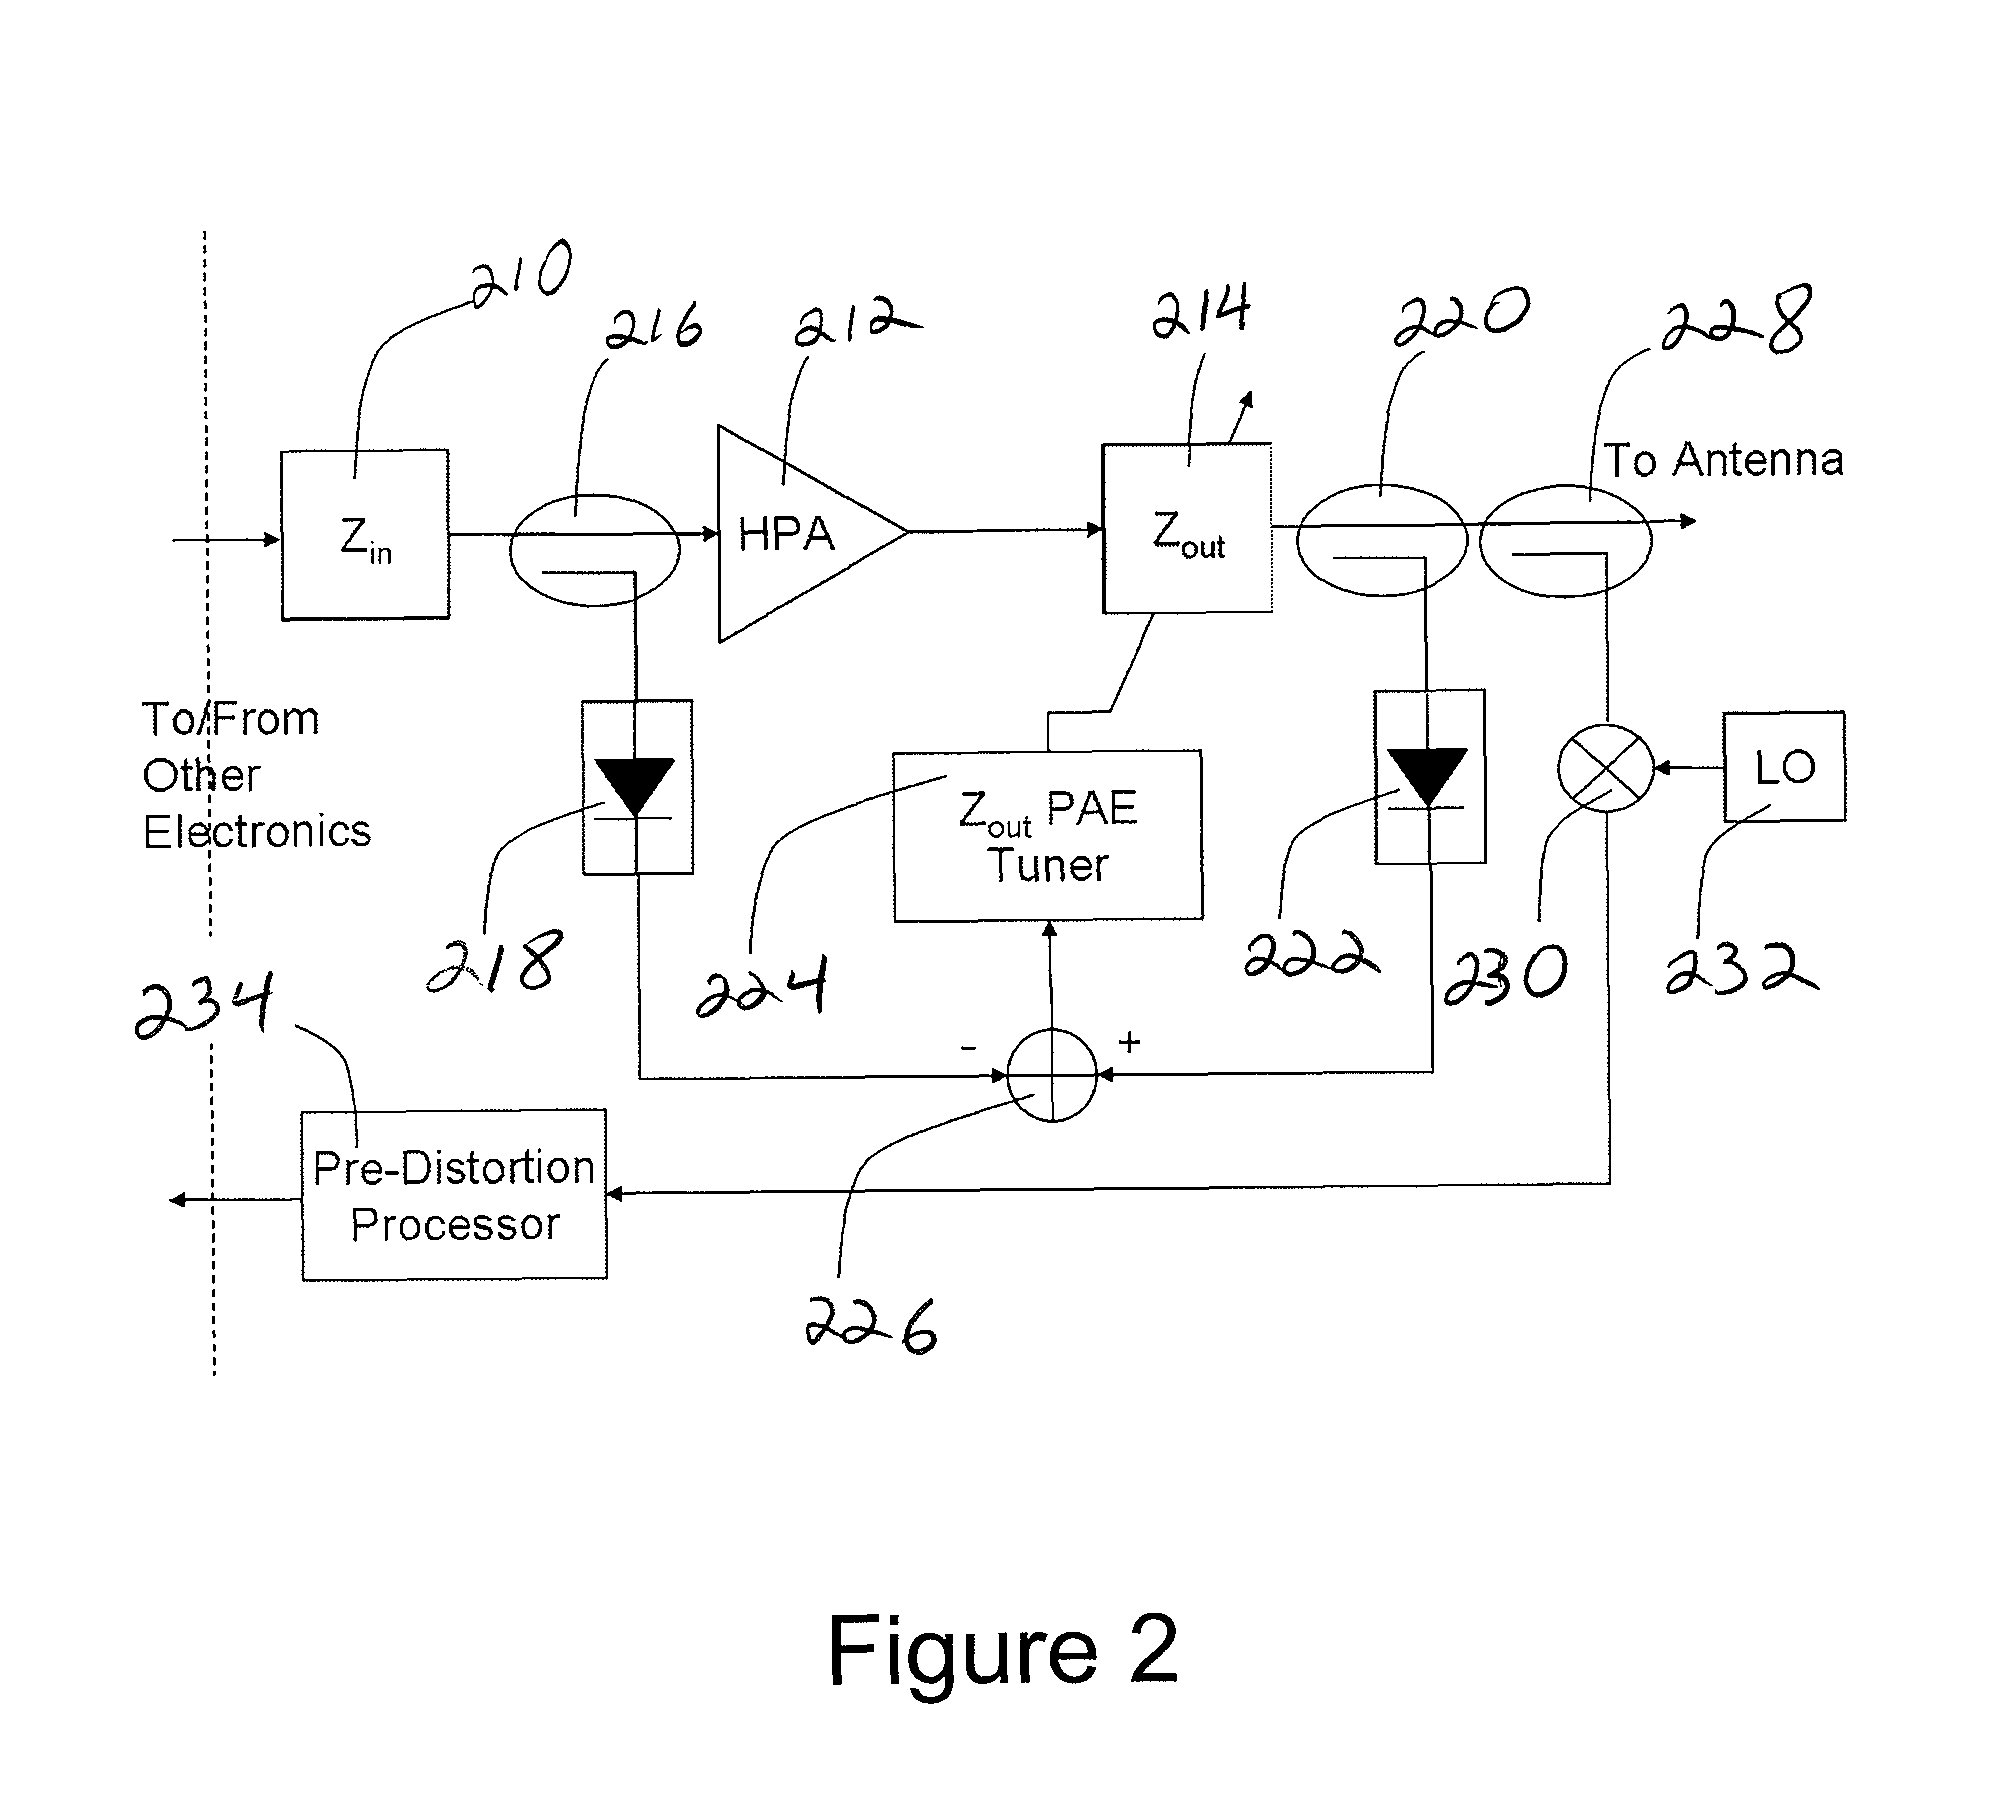 Apparatus and method for power added efficiency optimization of high amplification applications